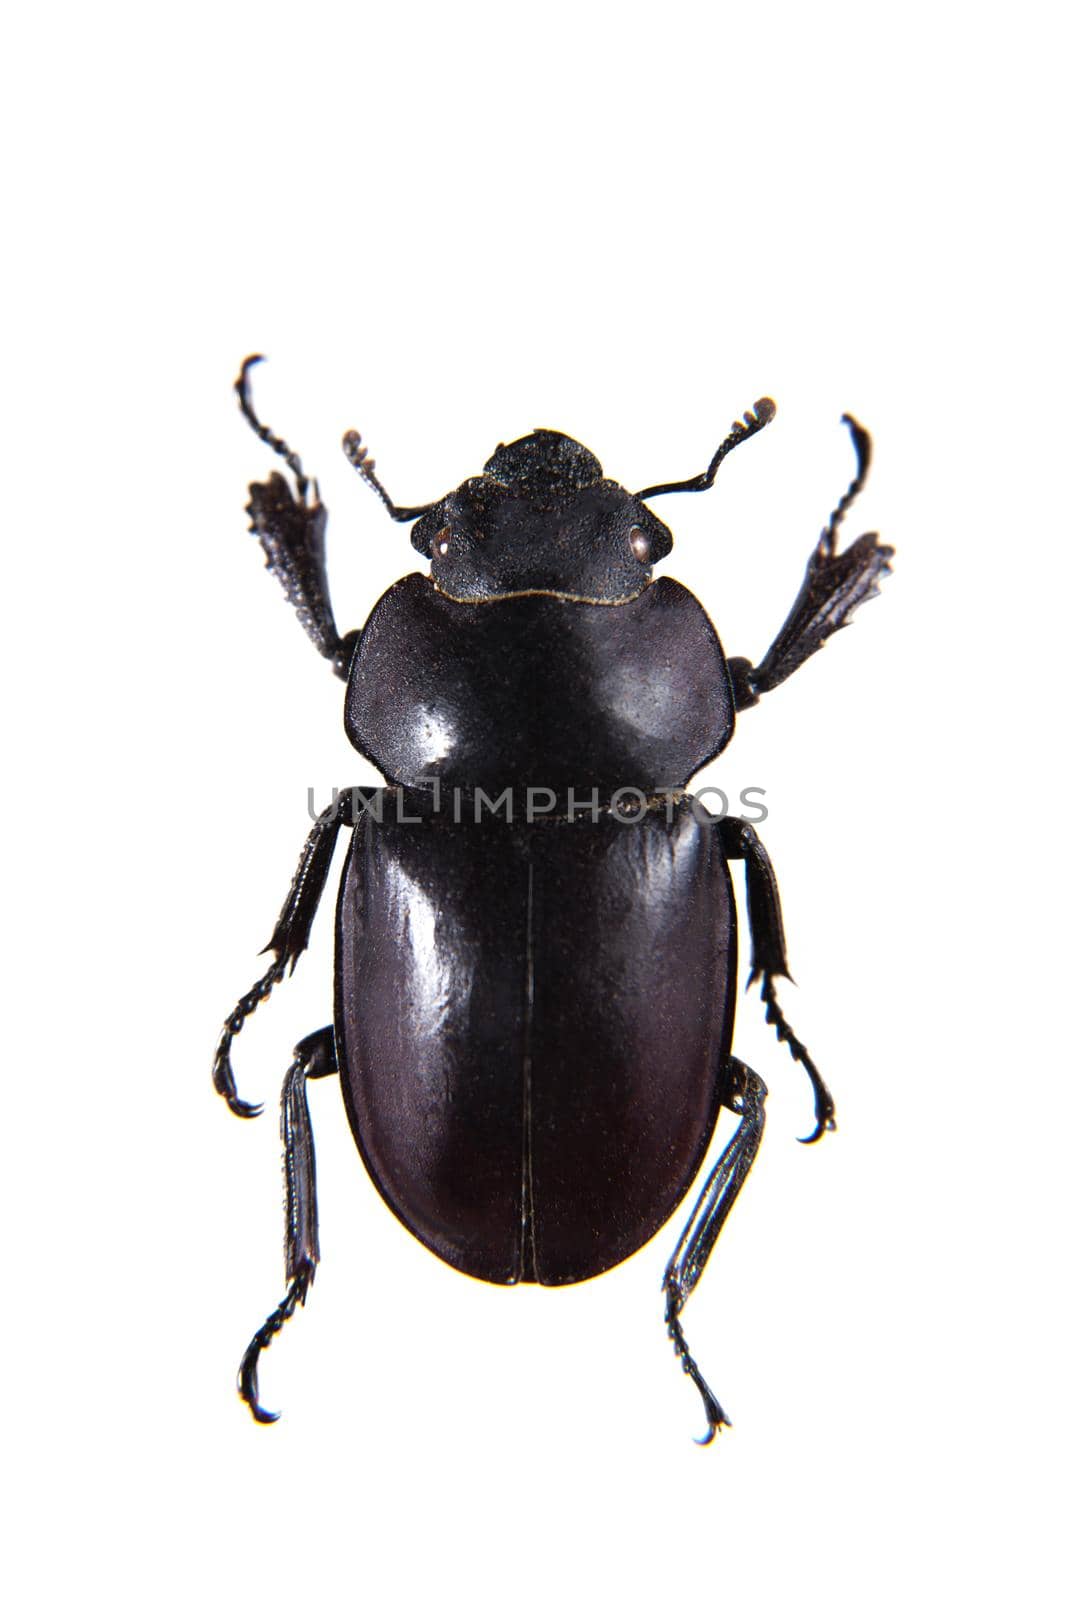 Rhinoceros beetle on the white background by RosaJay